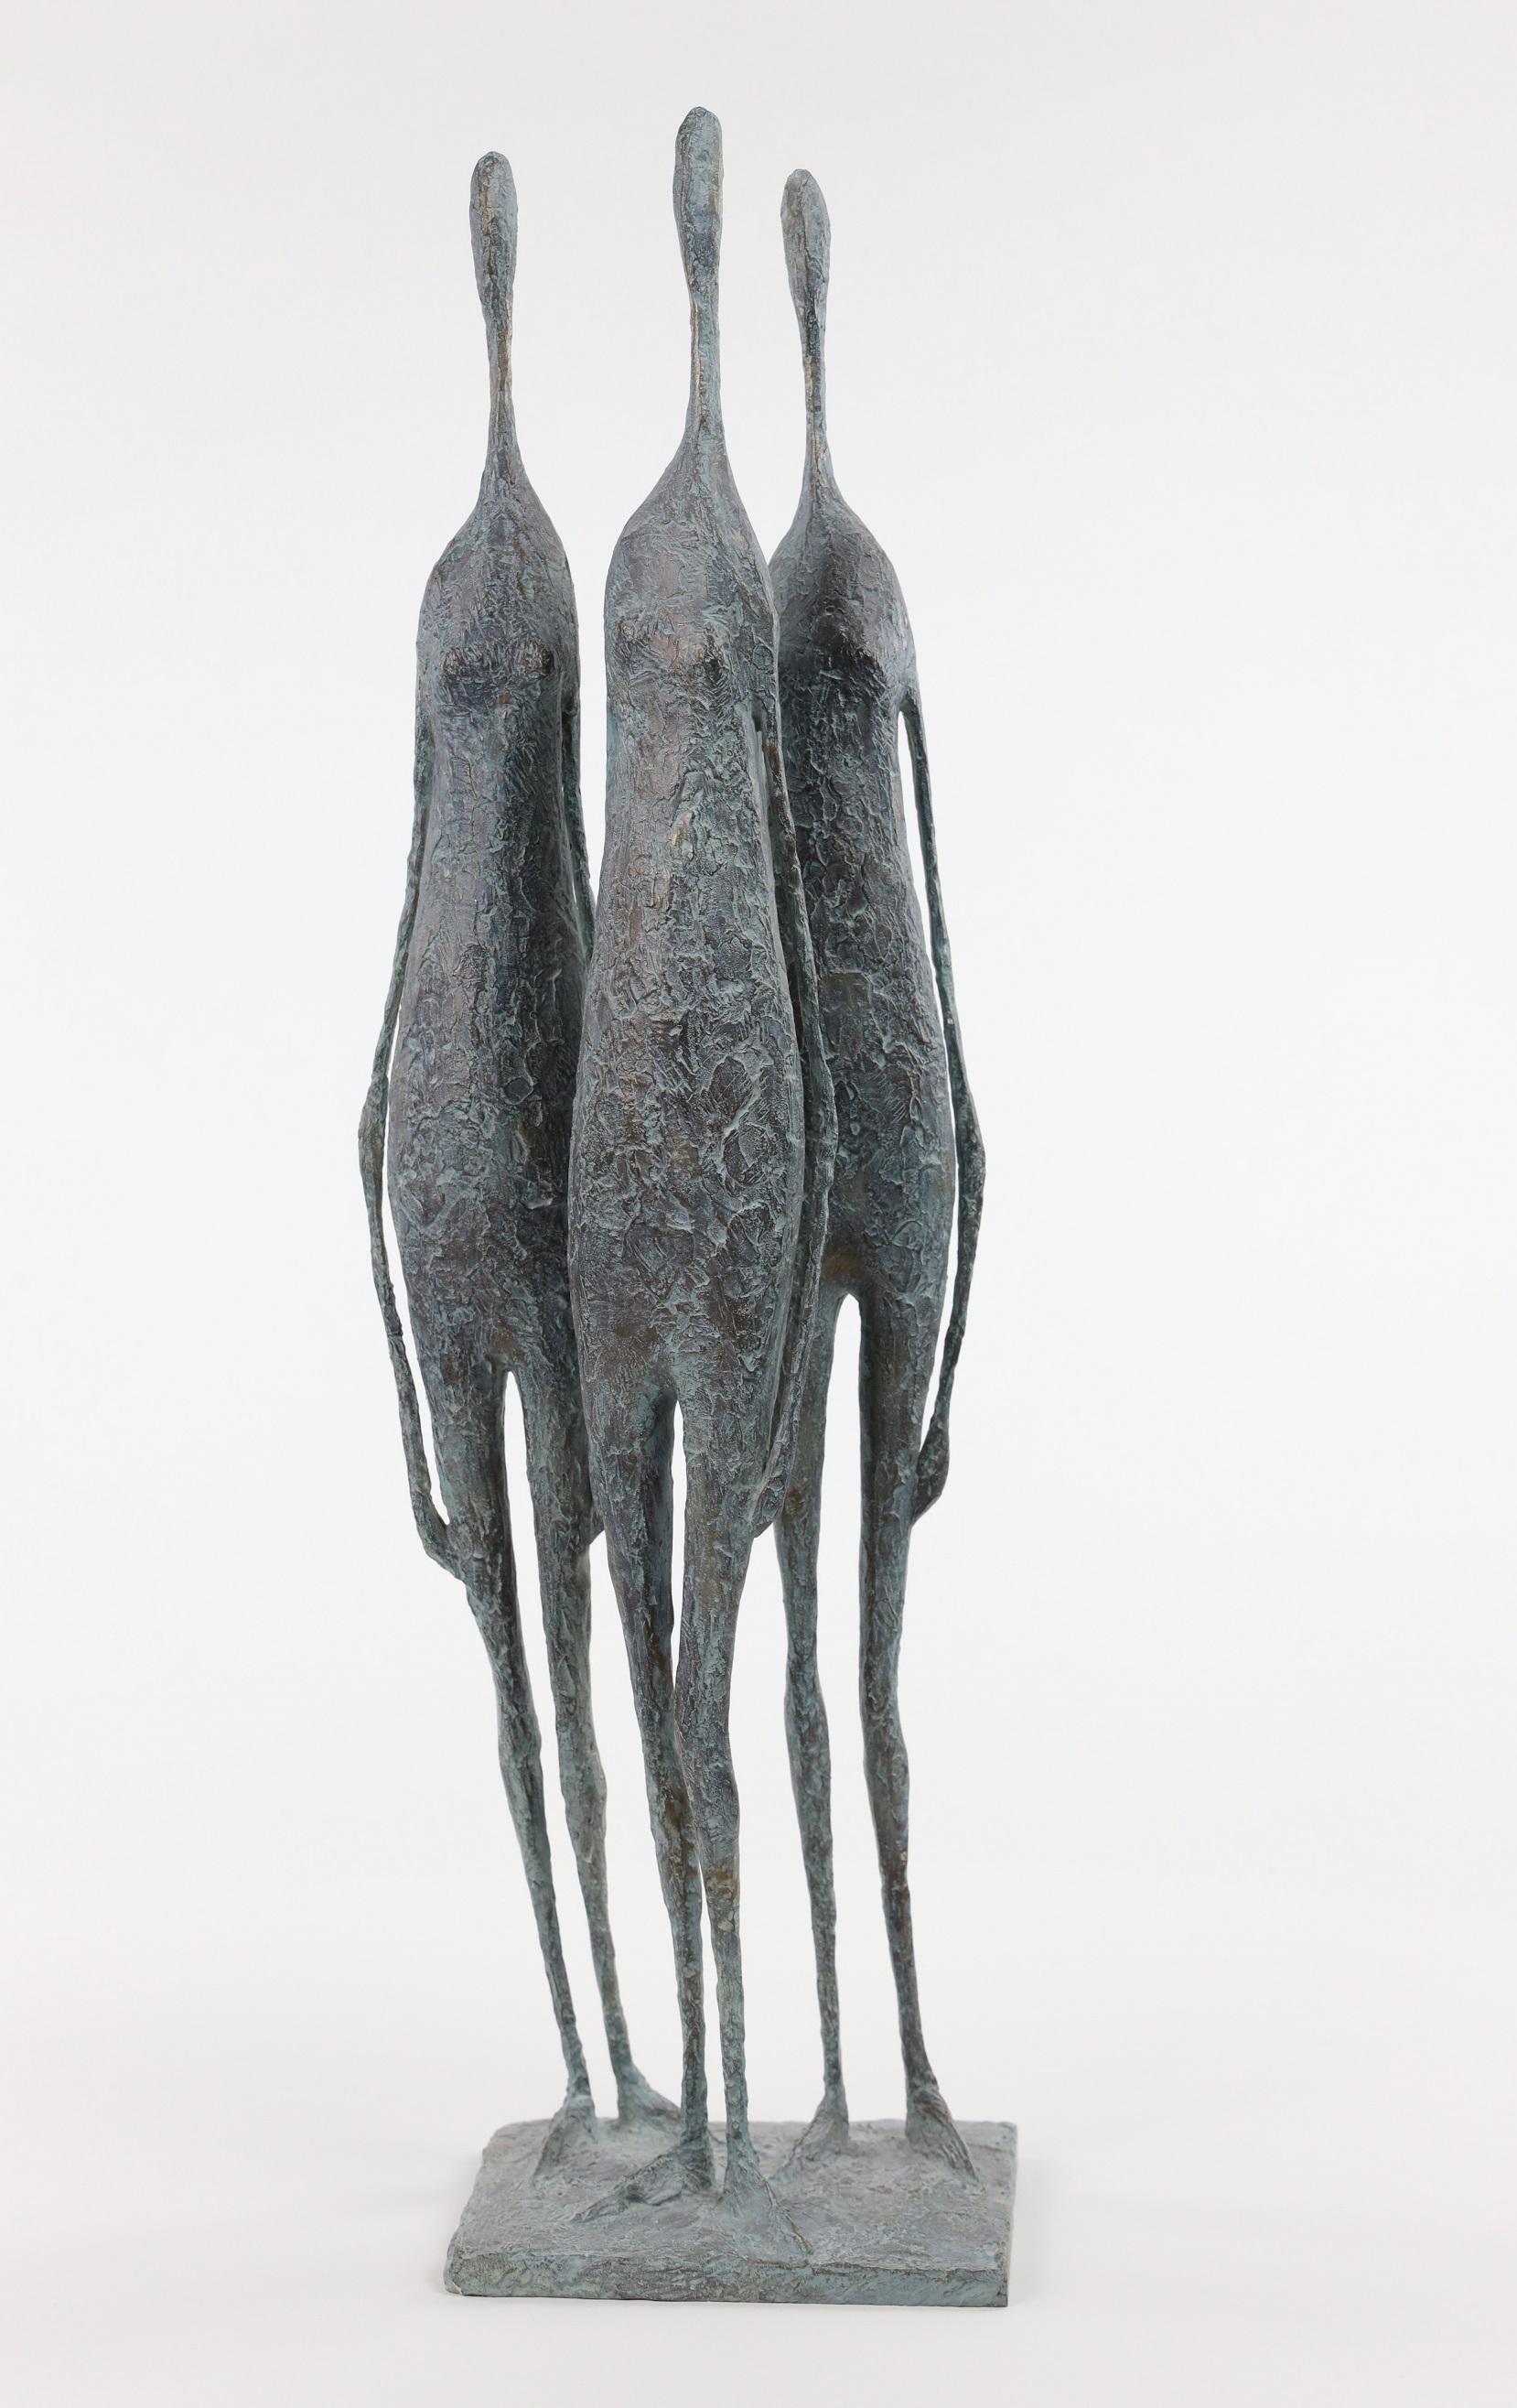 3 Standing Figures VI is a bronze sculpture by French contemporary artist Pierre Yermia, dimensions are 64 × 17 × 15 cm (25.2 × 6.7 × 5.9 in). 
The sculpture is signed and numbered, it is part of a limited edition of 8 editions + 4 artist’s proofs,